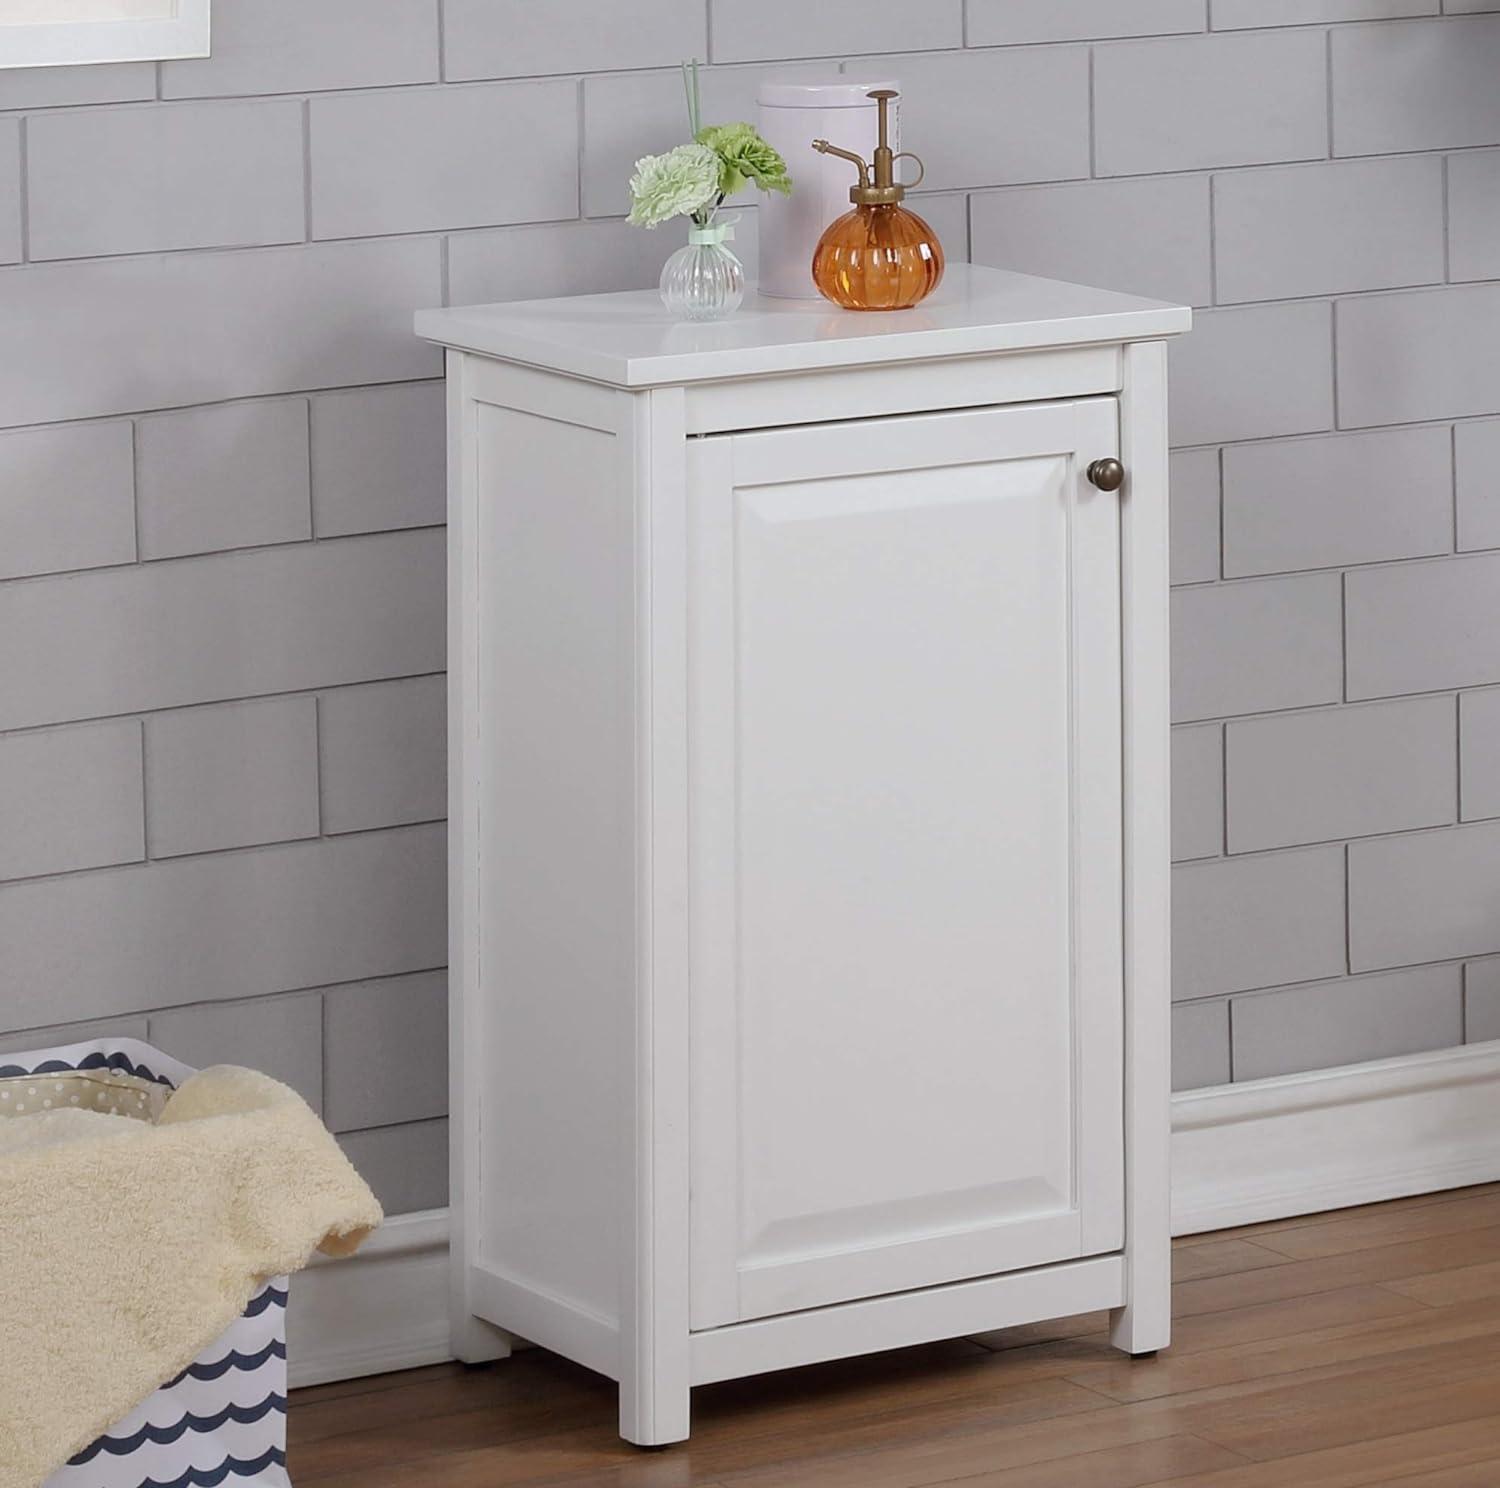 Adjustable White Wood Storage Tower with Doors